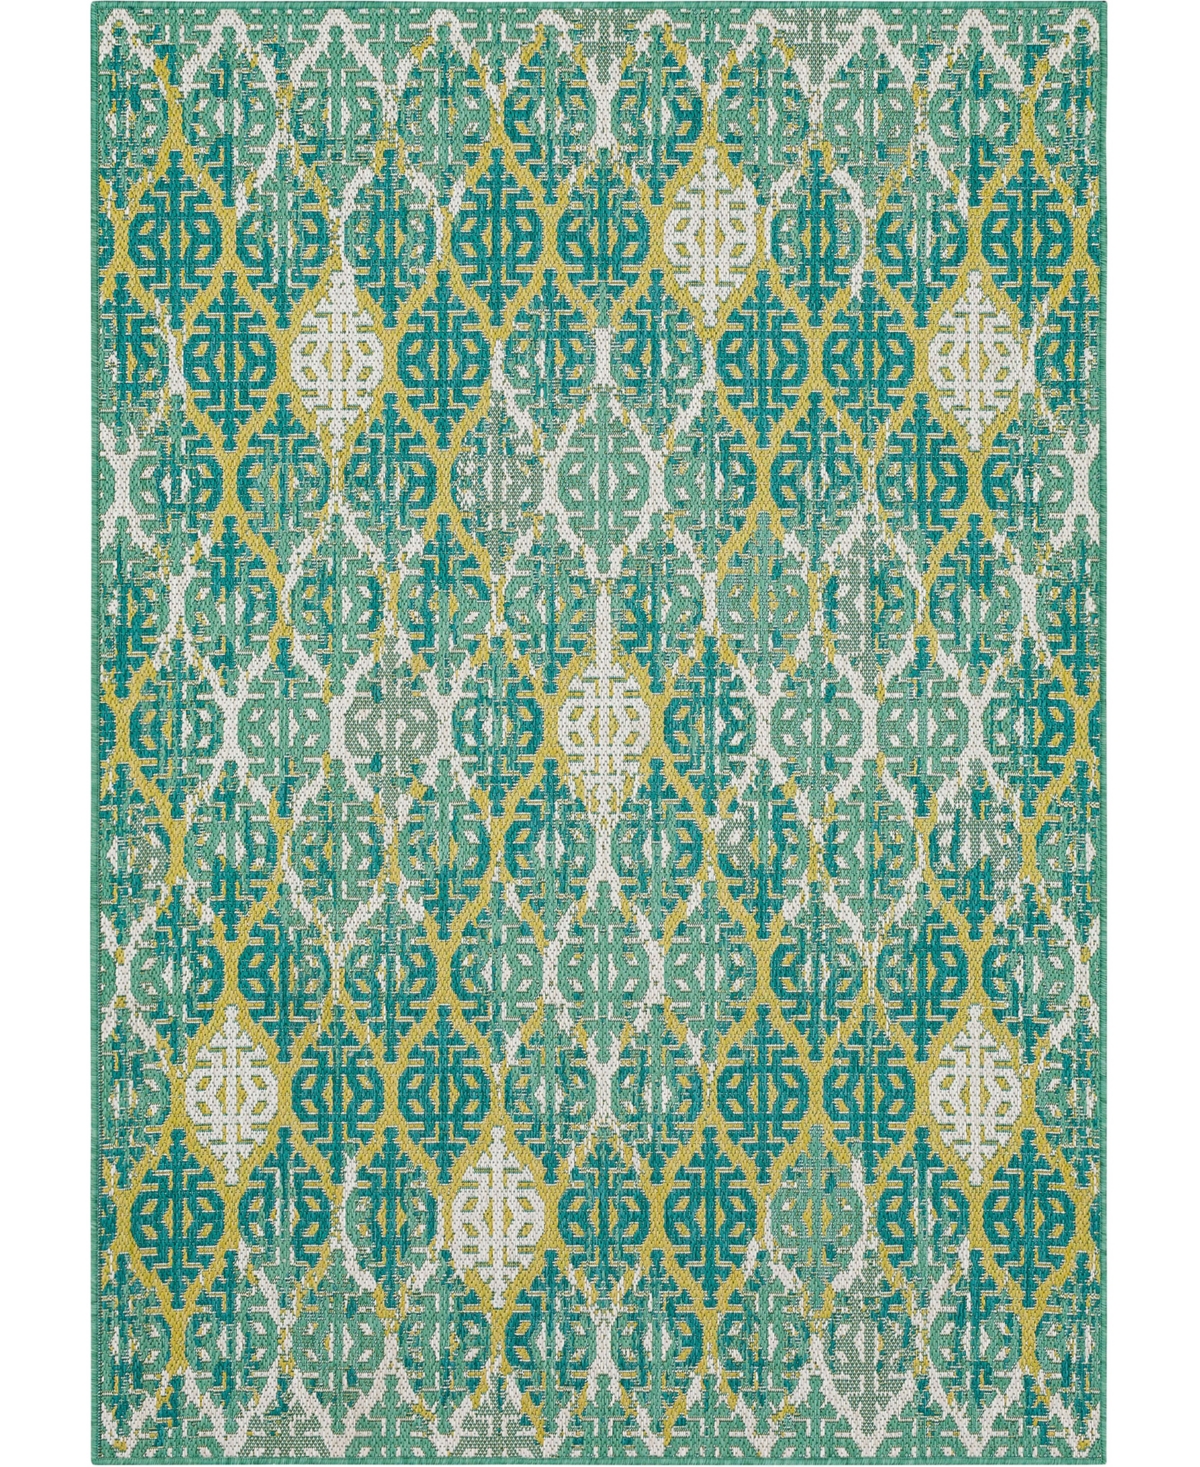 Mohawk Malibu Outdoor Stamped Ikat 5'3" X 7'6" Area Rug In Teal